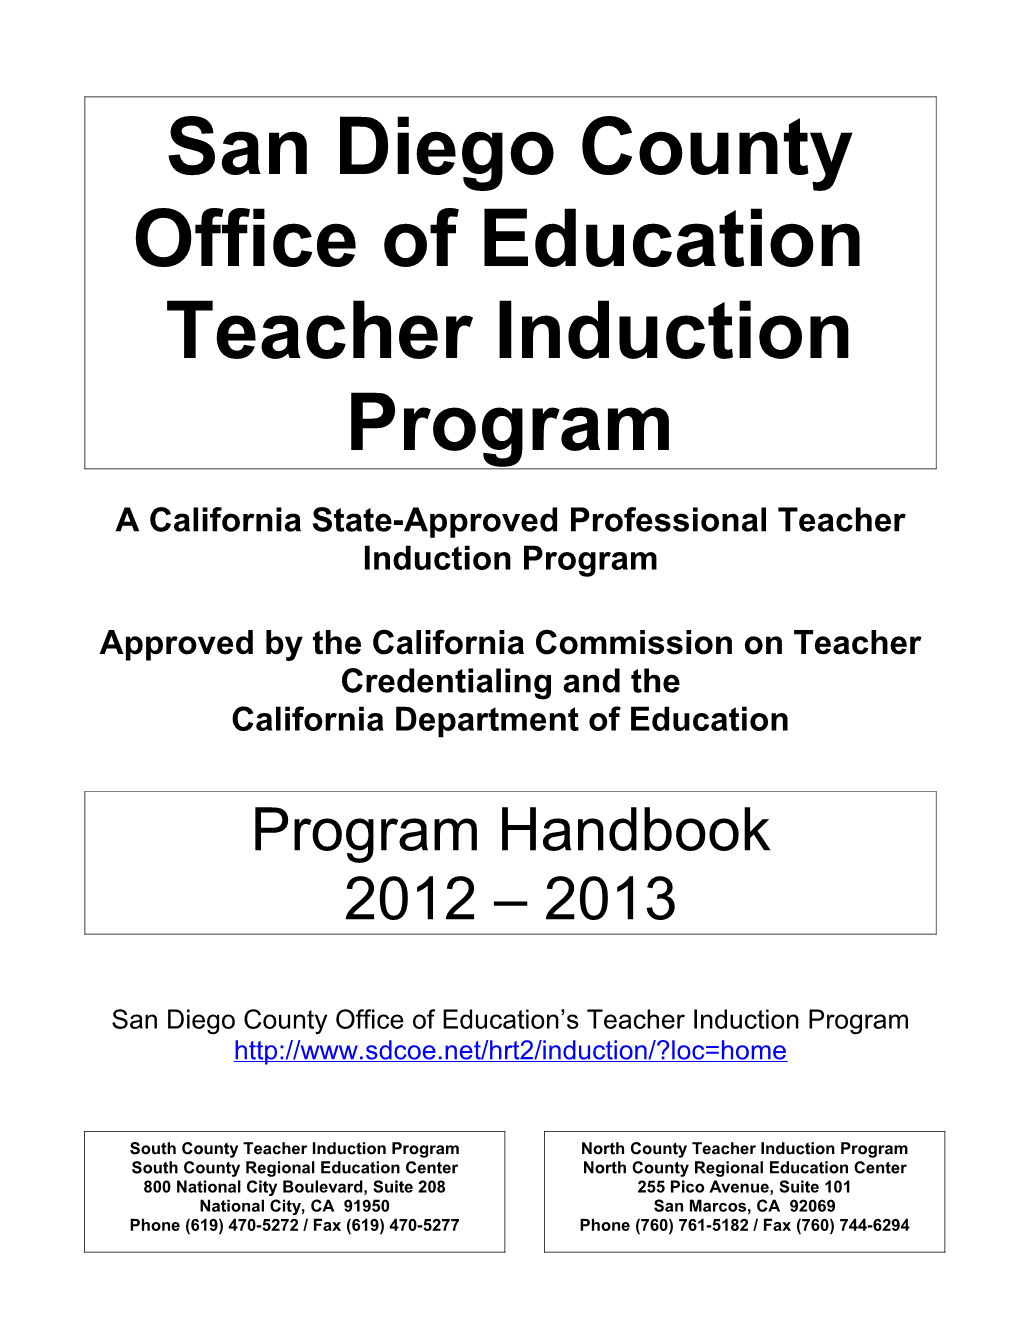 A California State-Approved Professional Teacher Induction Program